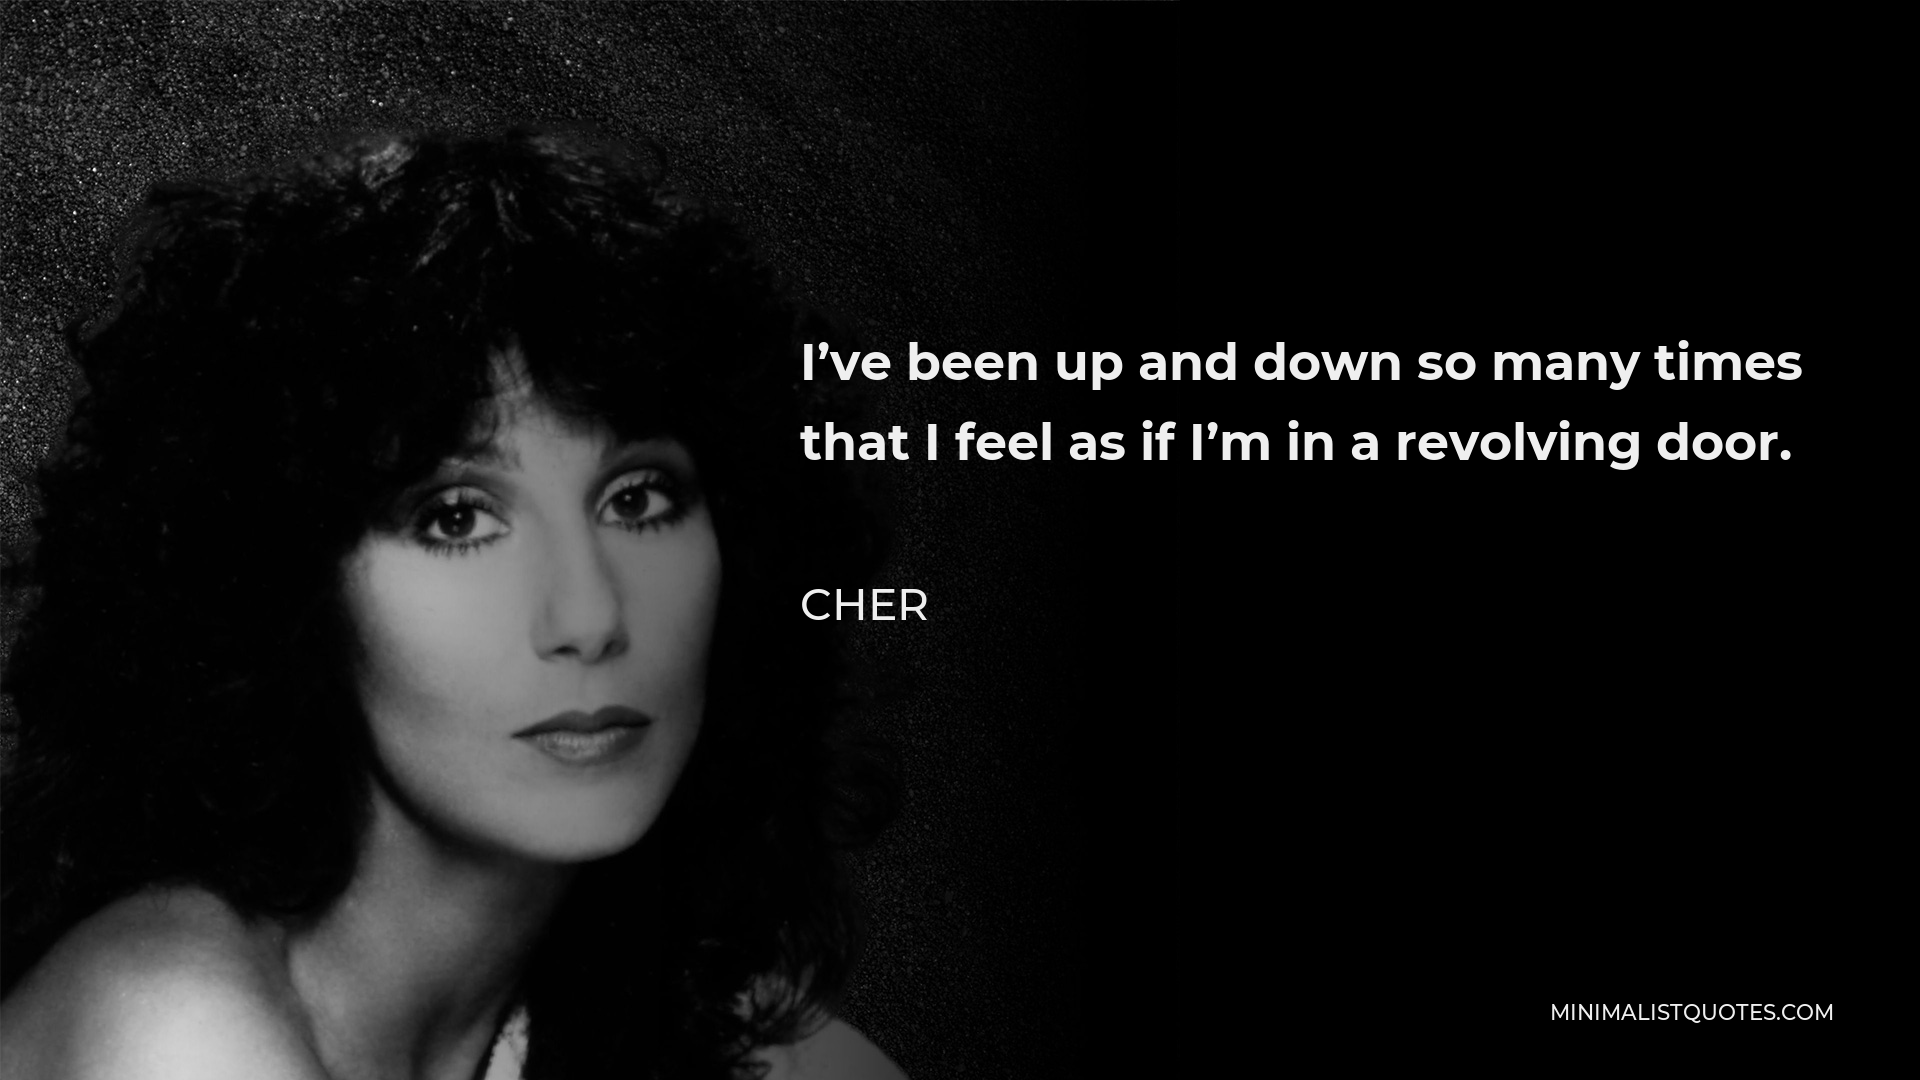 Cher Quote - I’ve been up and down so many times that I feel as if I’m in a revolving door.